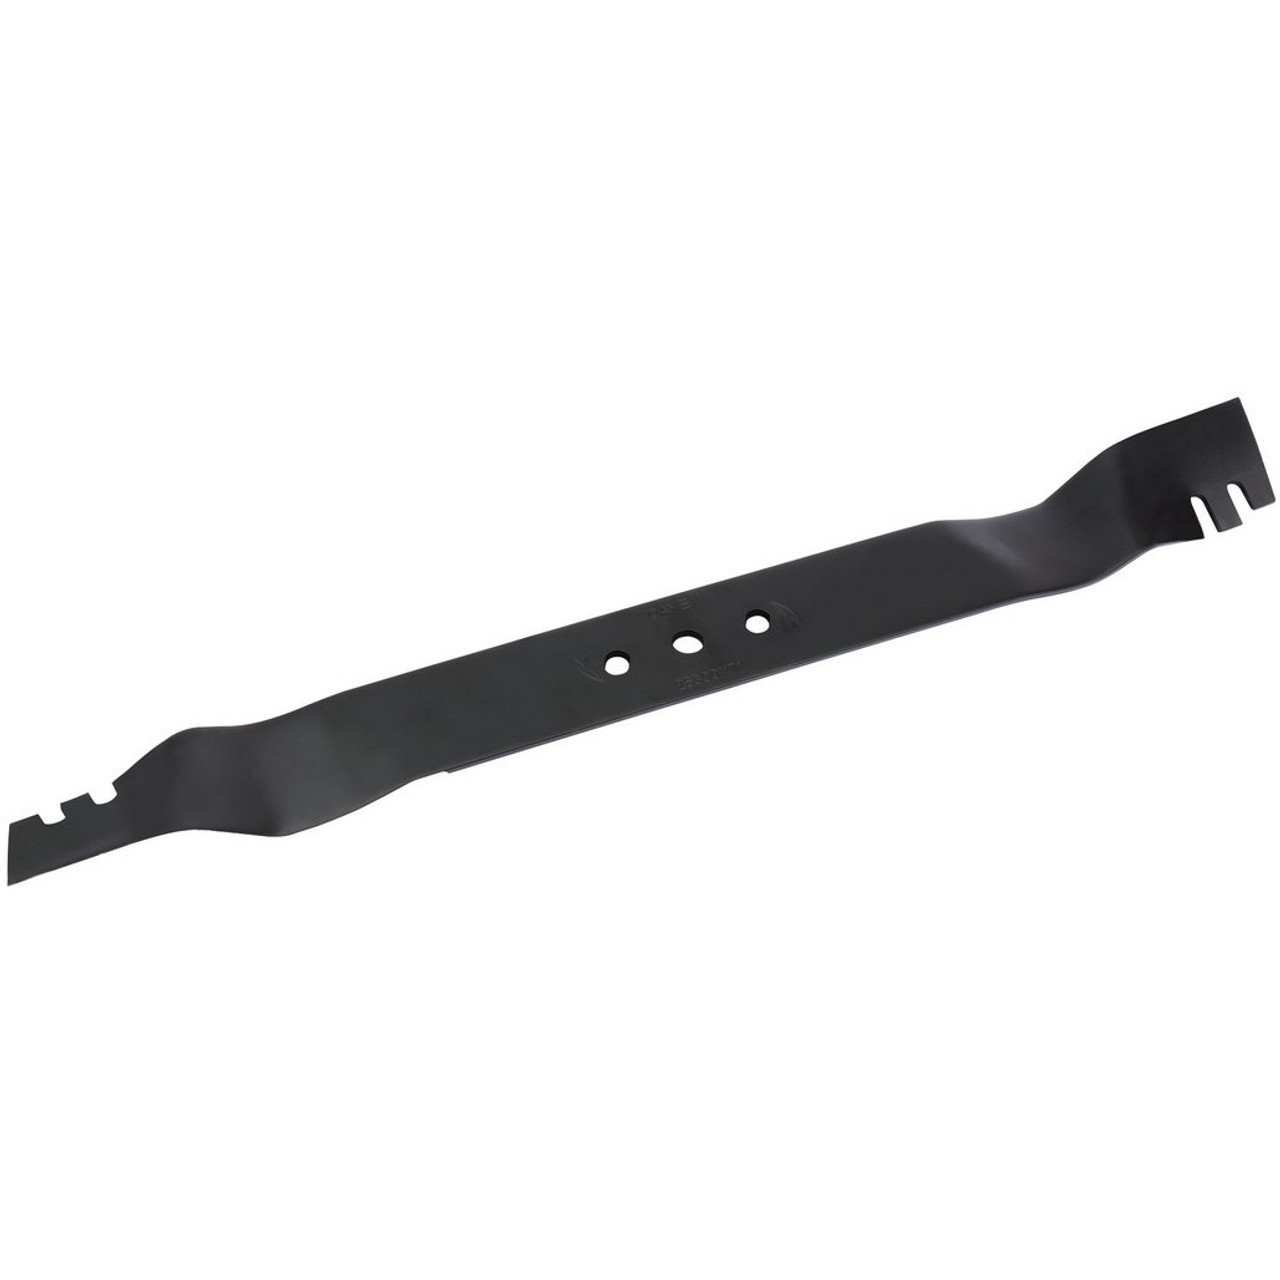 Draper Replacement Blade for 08674 Lawnmower 44121